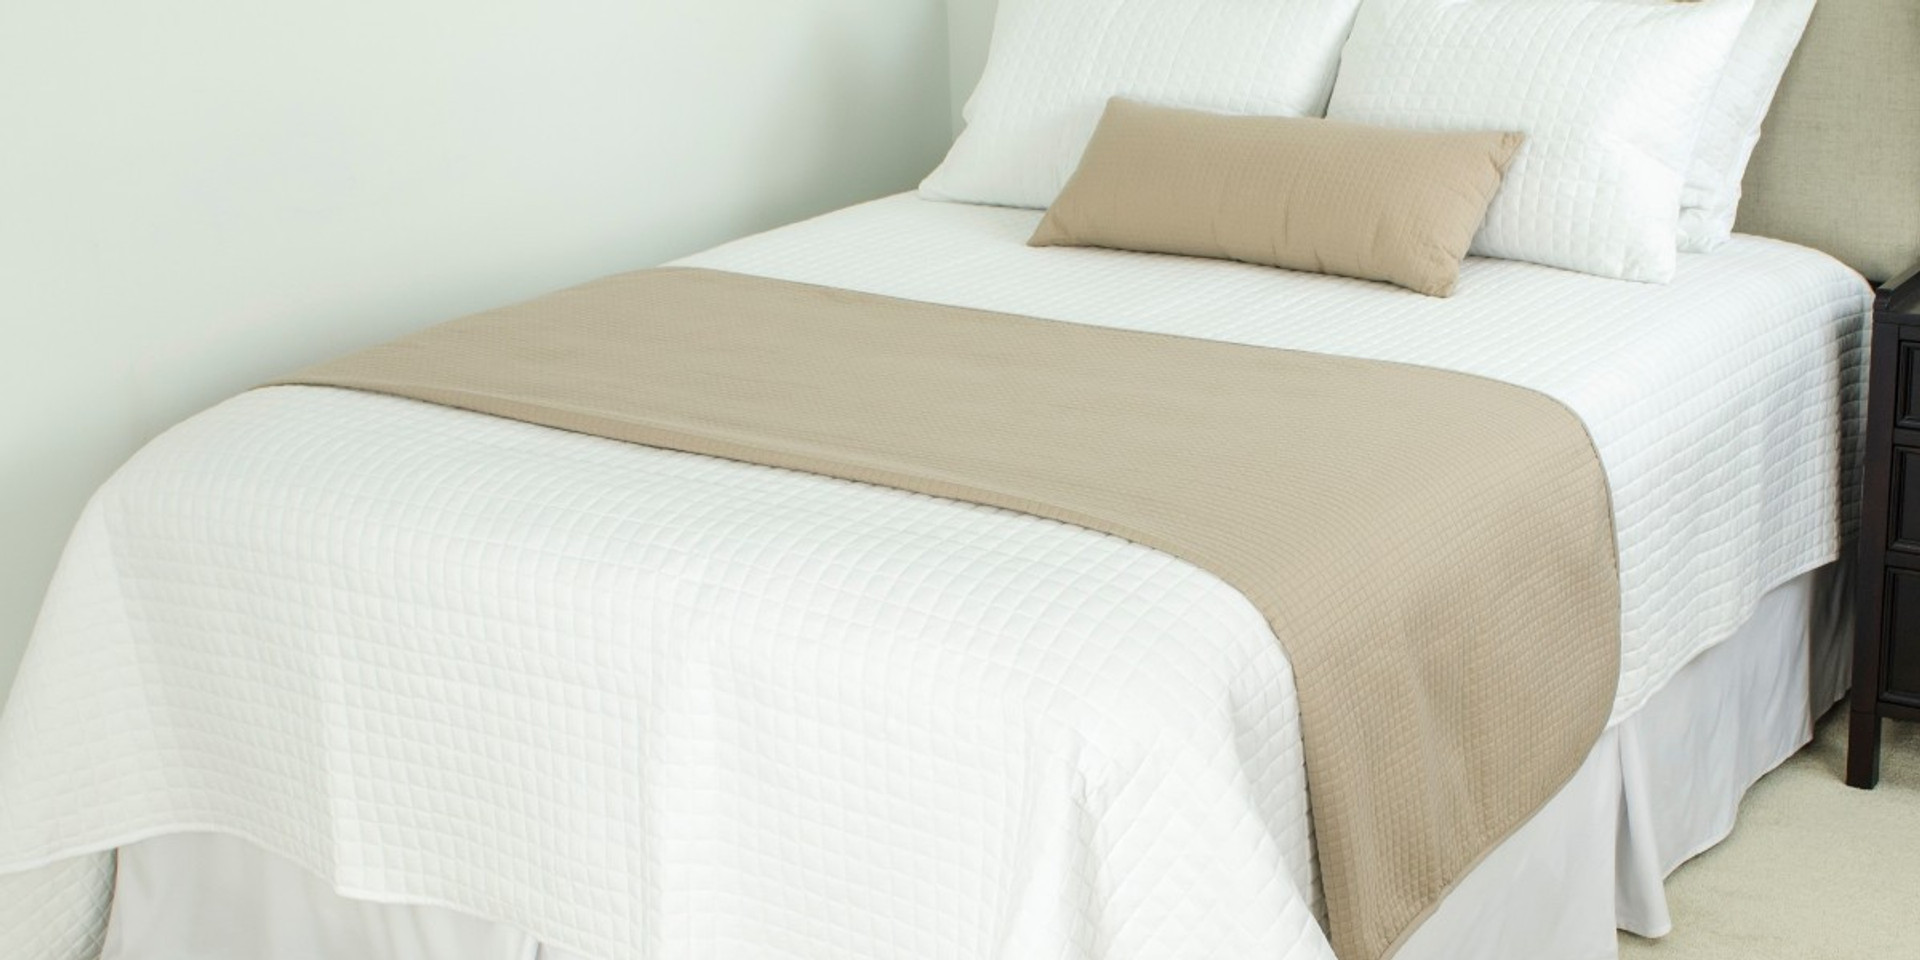 T250 Hotel Bed Sheets White In Bulk